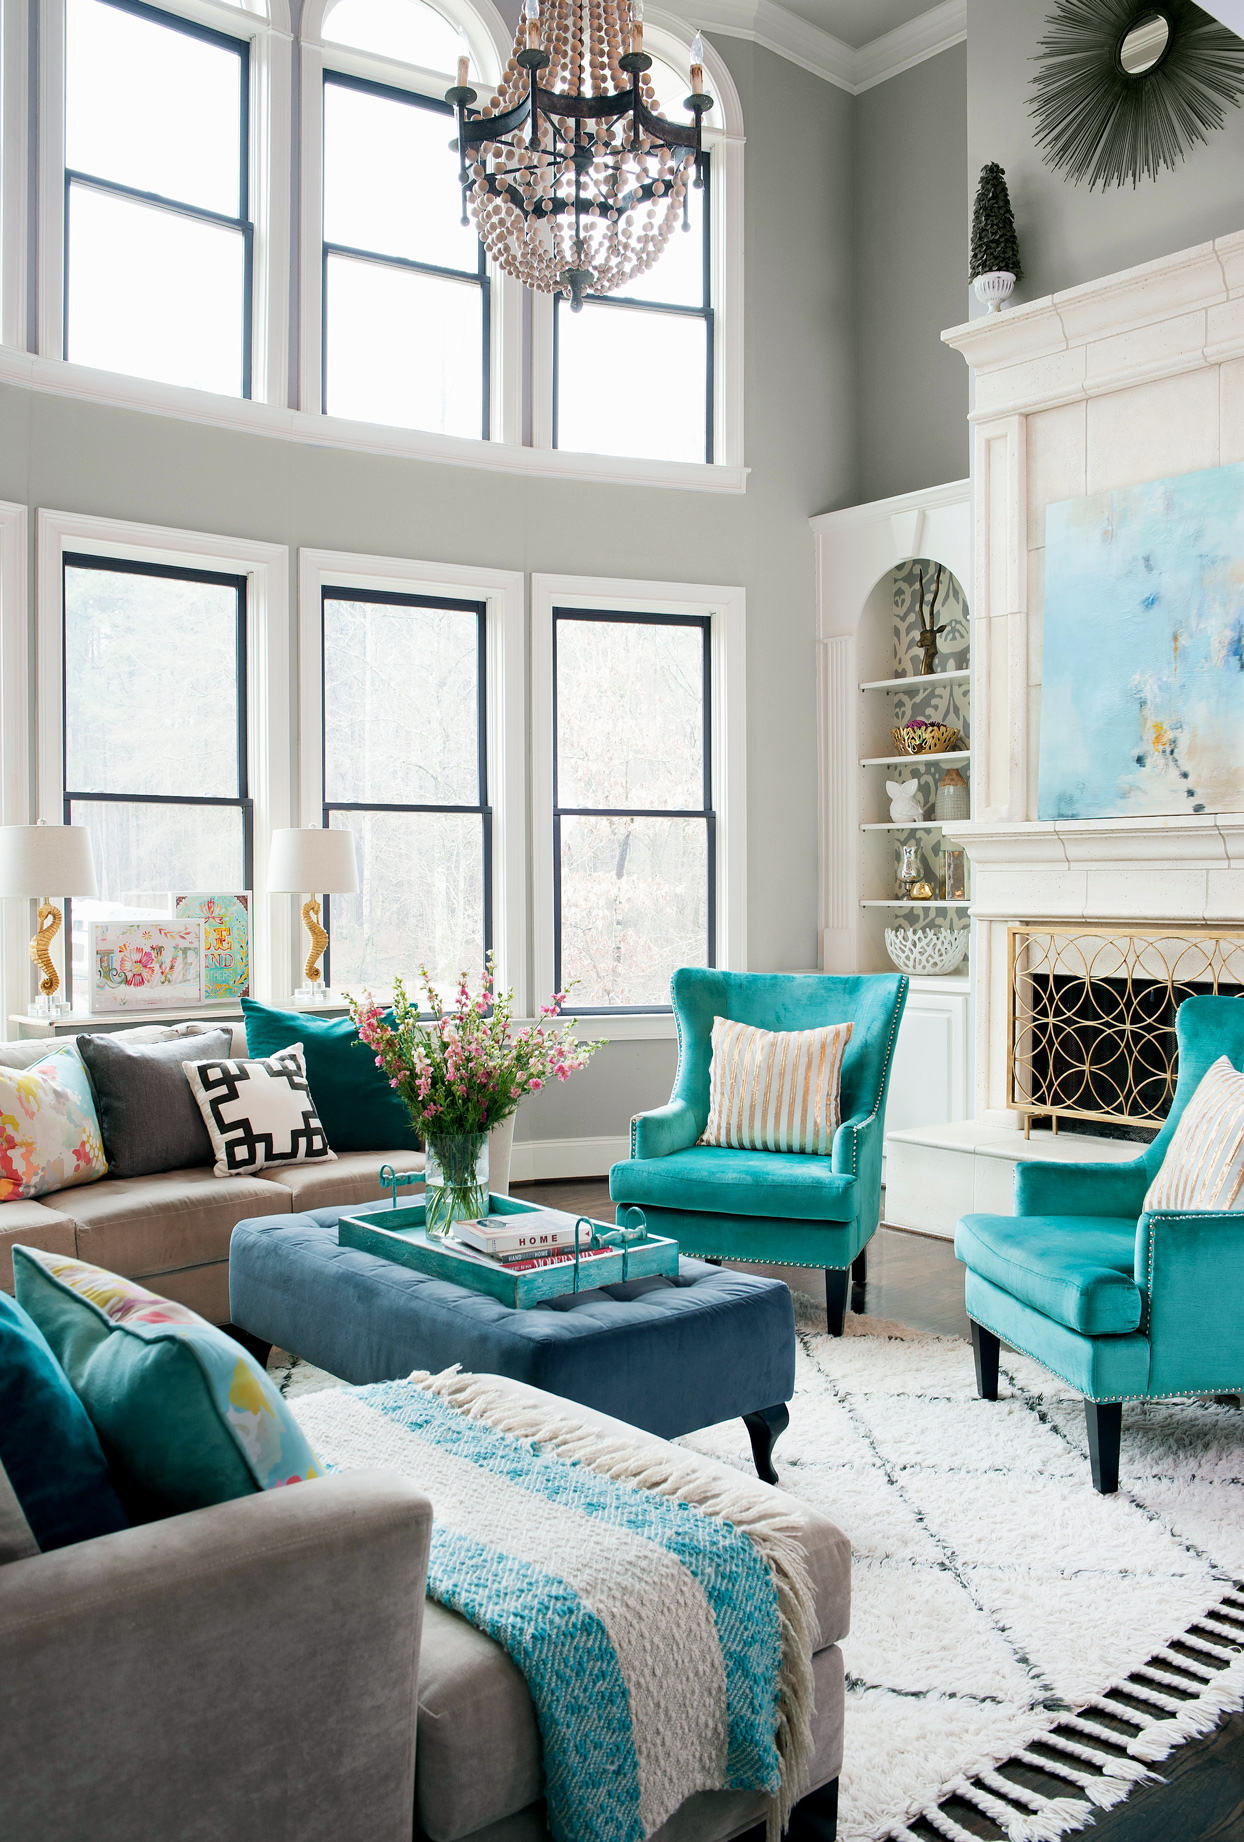 Pictures Of Teal Living Rooms - Chris Walsh blog